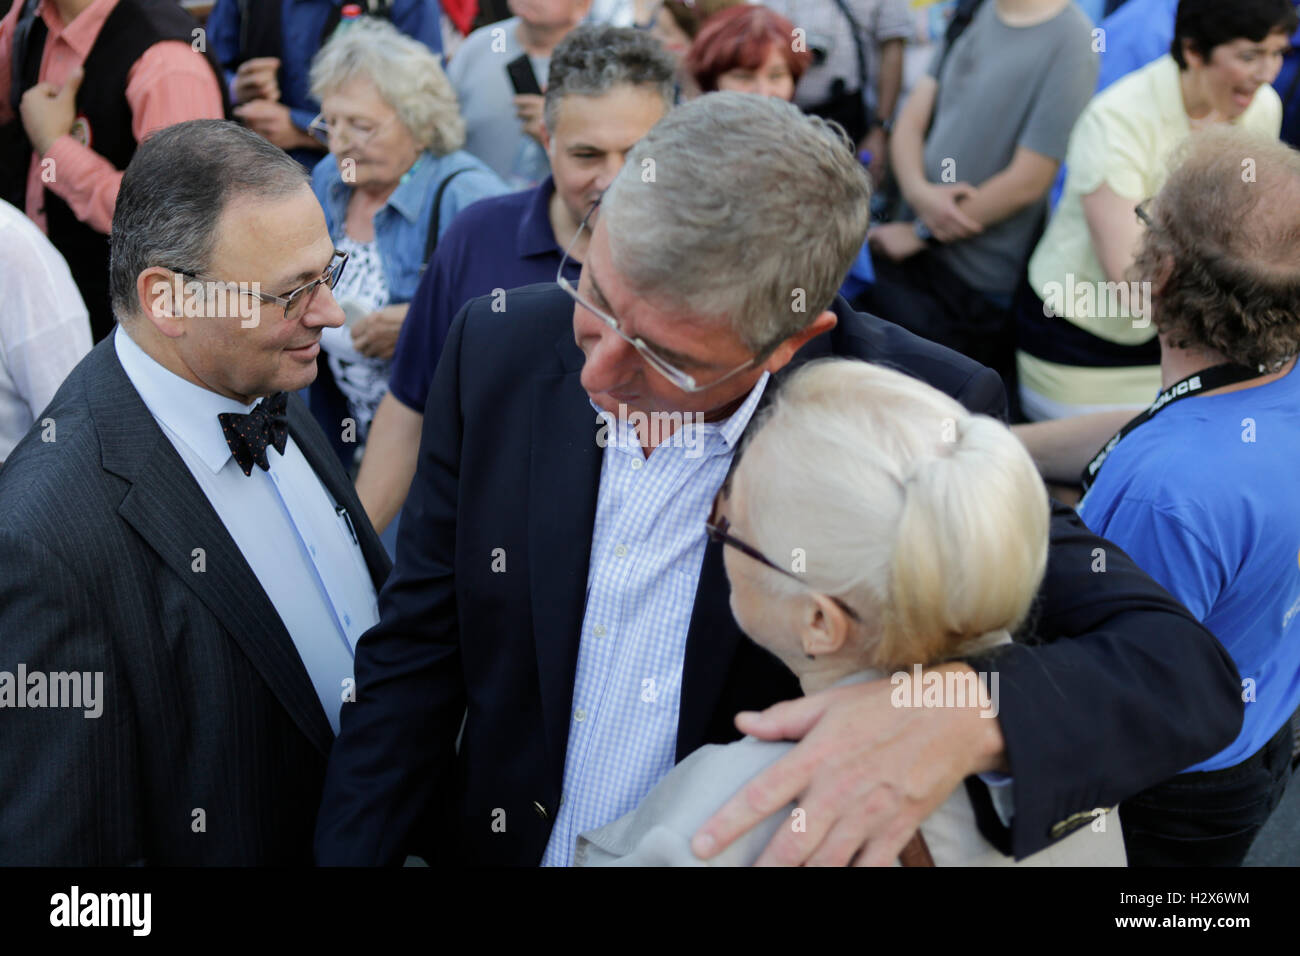 Ferenc Gyurcsany, the leader of Democratic Coalition and the former Prime Minister of Hungary, hugs a supporter of the referendum boycott. The last day ahead of the Hungarian migrant quota referendum saw two protests outside the Hungarian Parliament building. On the one side of the square protested members of the Democratic Coalition, including their leader, the former Prime Minister of Hungary Ferenc Gyurcsany, for a boycott of the referendum. On the other side of the square called supporters of the right wing Jobbik for a ‘No' vote. the Right wing protest was also attended by members of the Stock Photo